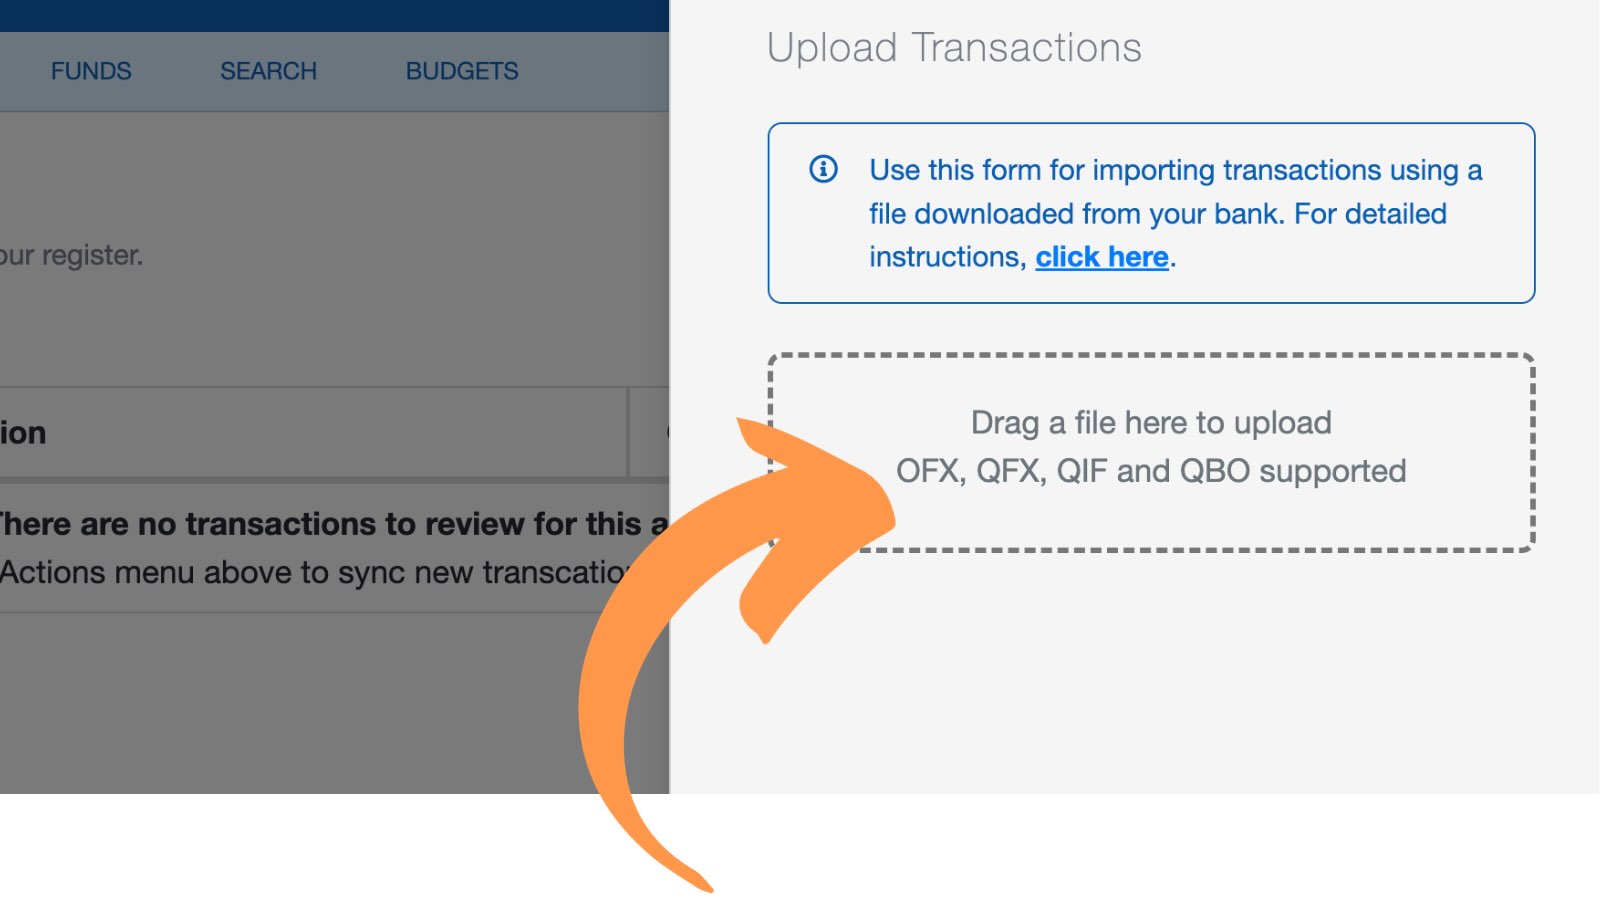 Upload the OFX or QFX file of church bank account to begin importing transactions